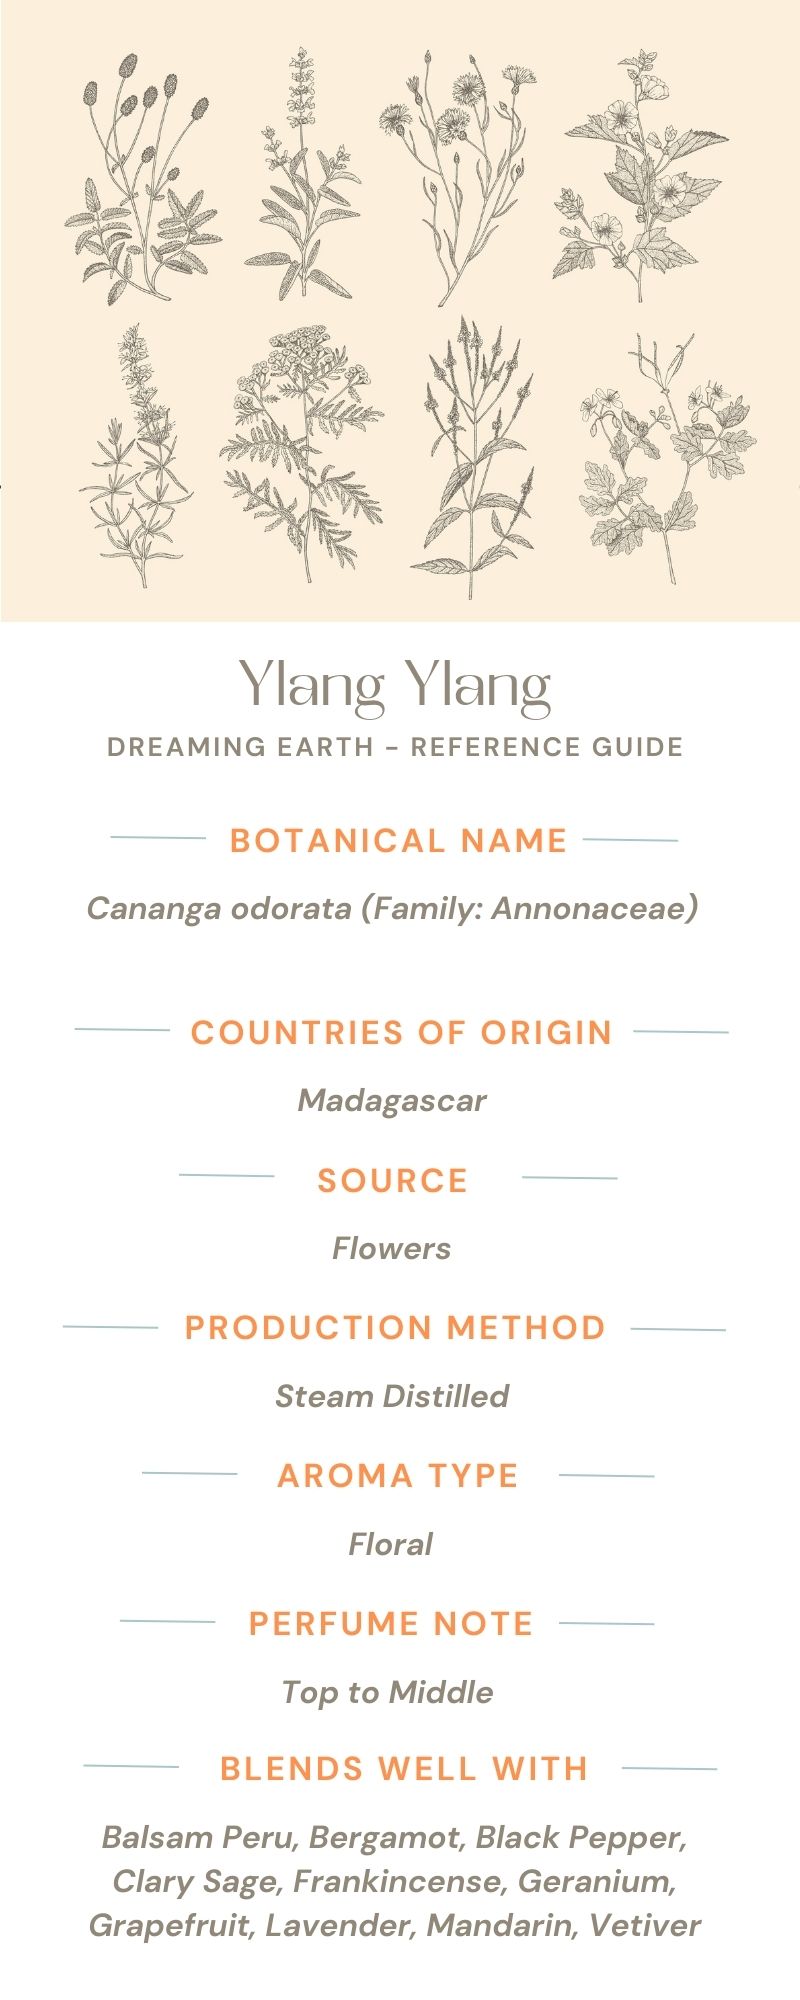 Load image into Gallery viewer, Ylang Ylang Extra Essential Oil - Dreaming Earth Inc
